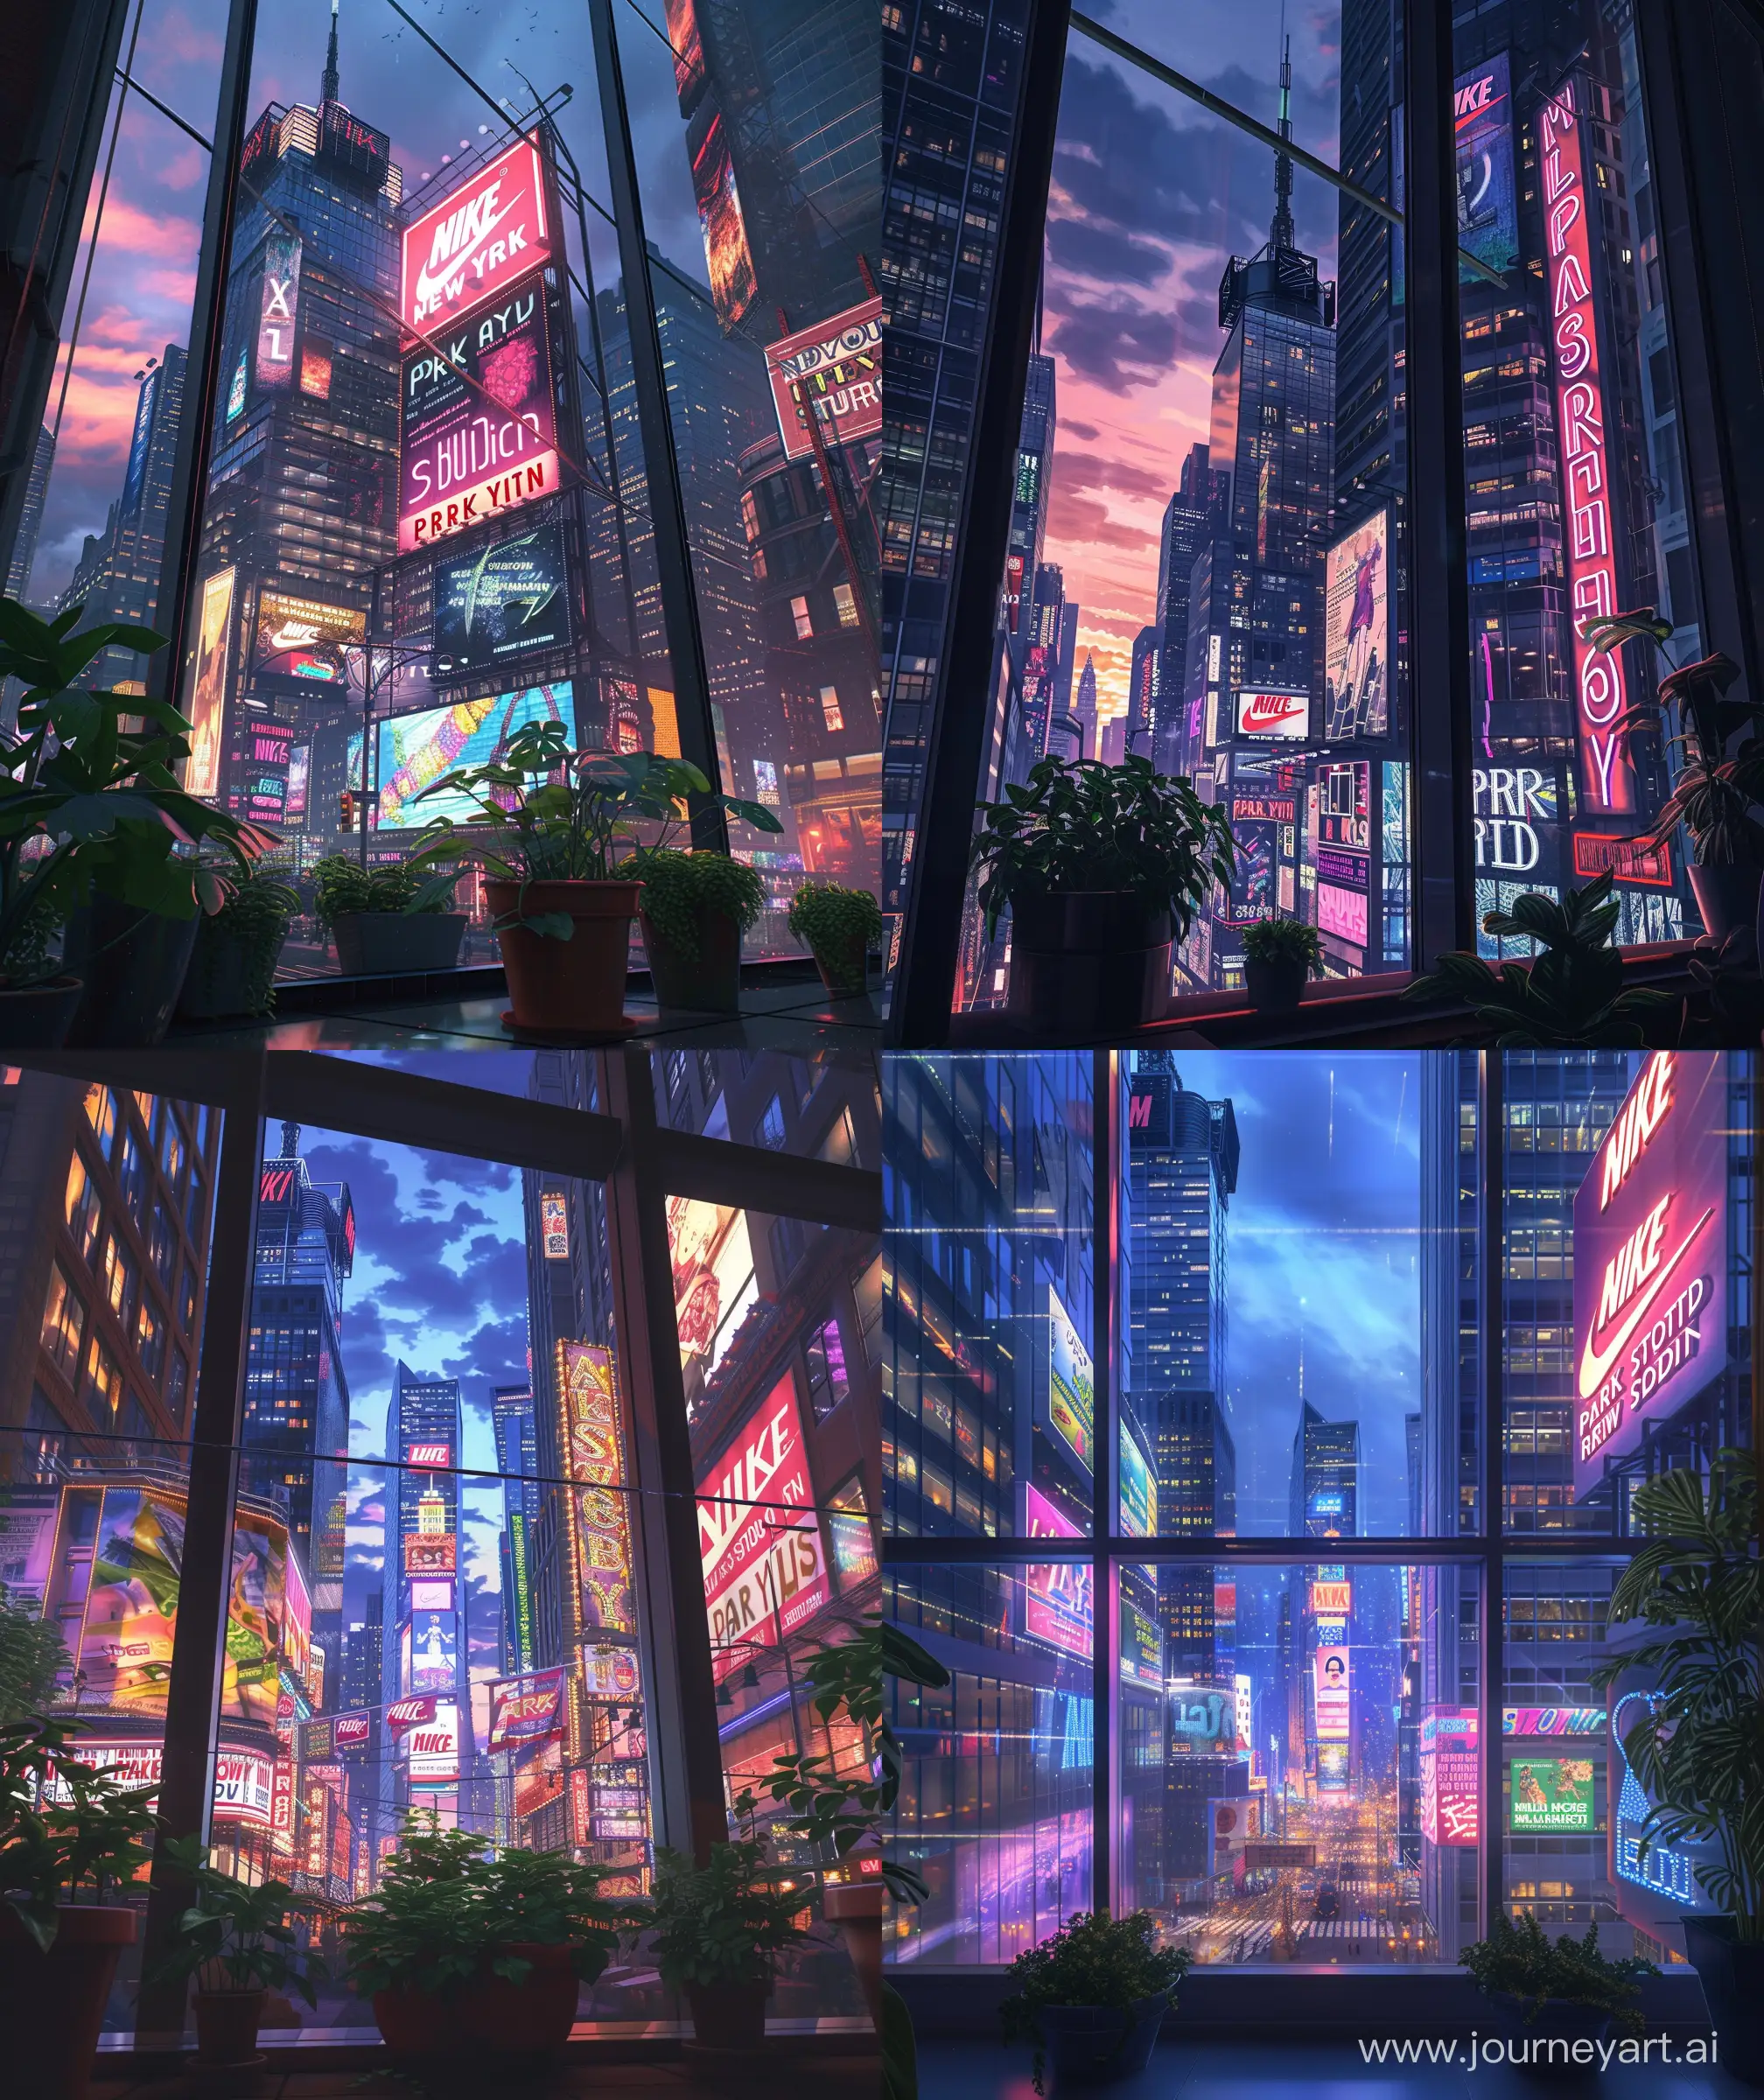 Anime scenes, view from big glass window, potted plant around window, main focus view of newyork city concrete jungle, urban High rise building, evening time, lights on building, verious neon sign banner like " fashion studio", "Nike sign", "park Avenue", ultra HD, high quality, urban look, vibrant sky, ultra HD, high quality sharp details --ar 27:32 --v 6.0